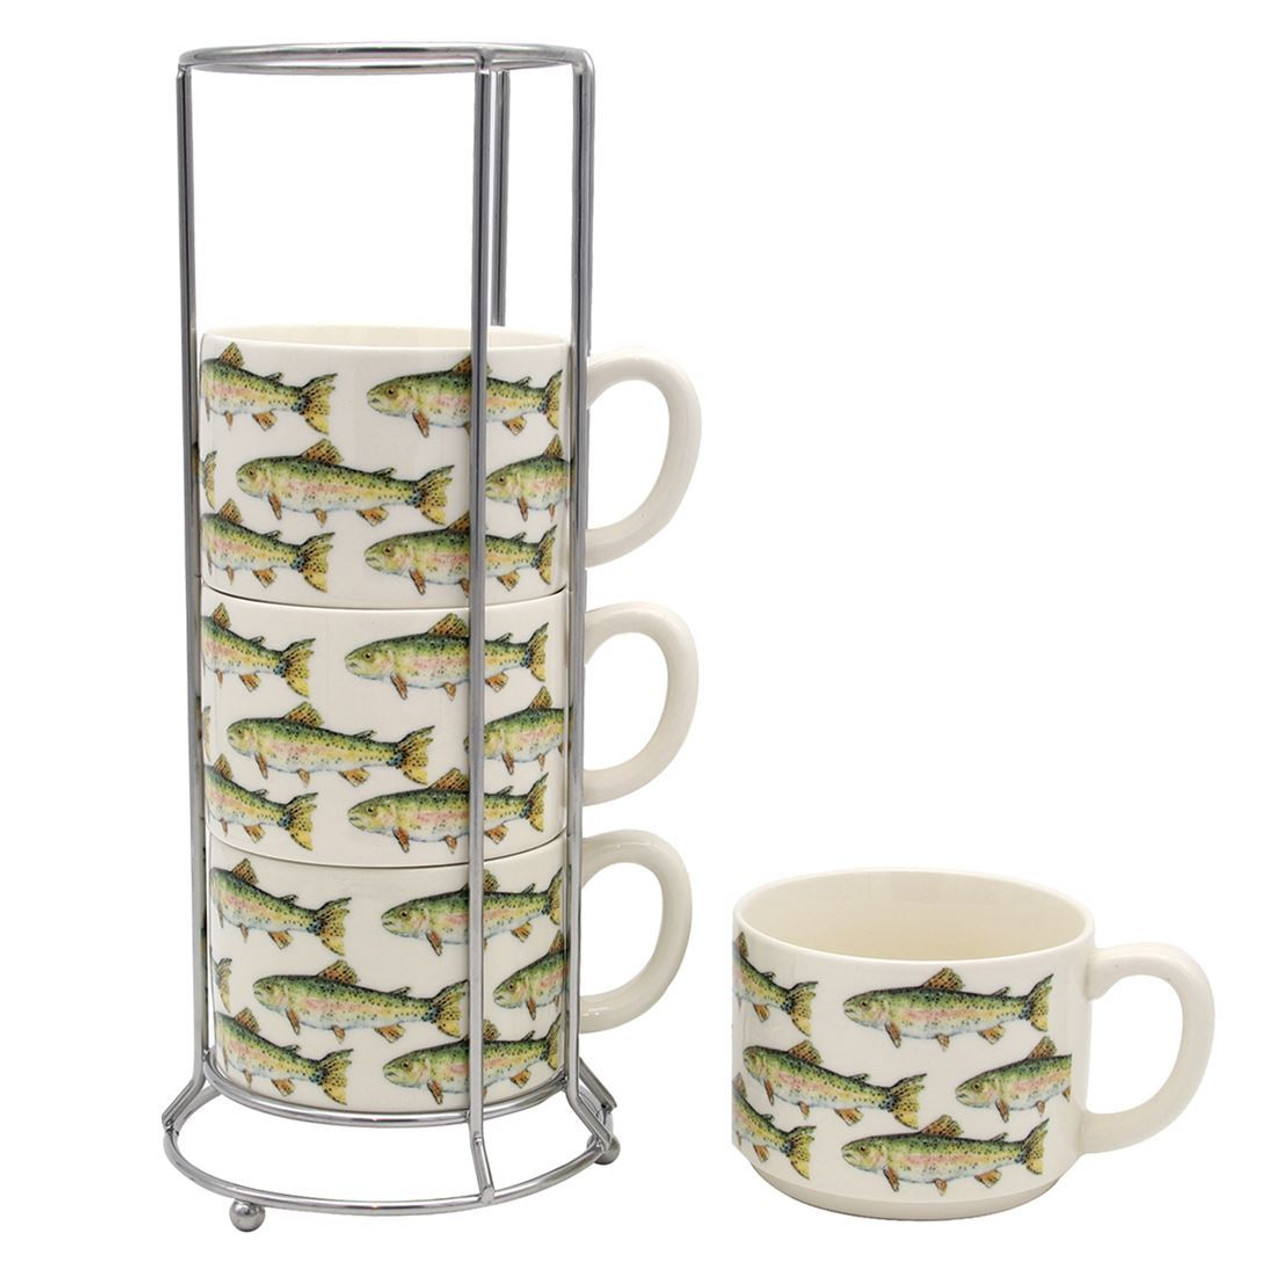 https://cdn11.bigcommerce.com/s-s8dcj5rpmy/images/stencil/1280x1280/products/4454/13138/trout-coffee-mugs__03194.1669266117.jpg?c=2